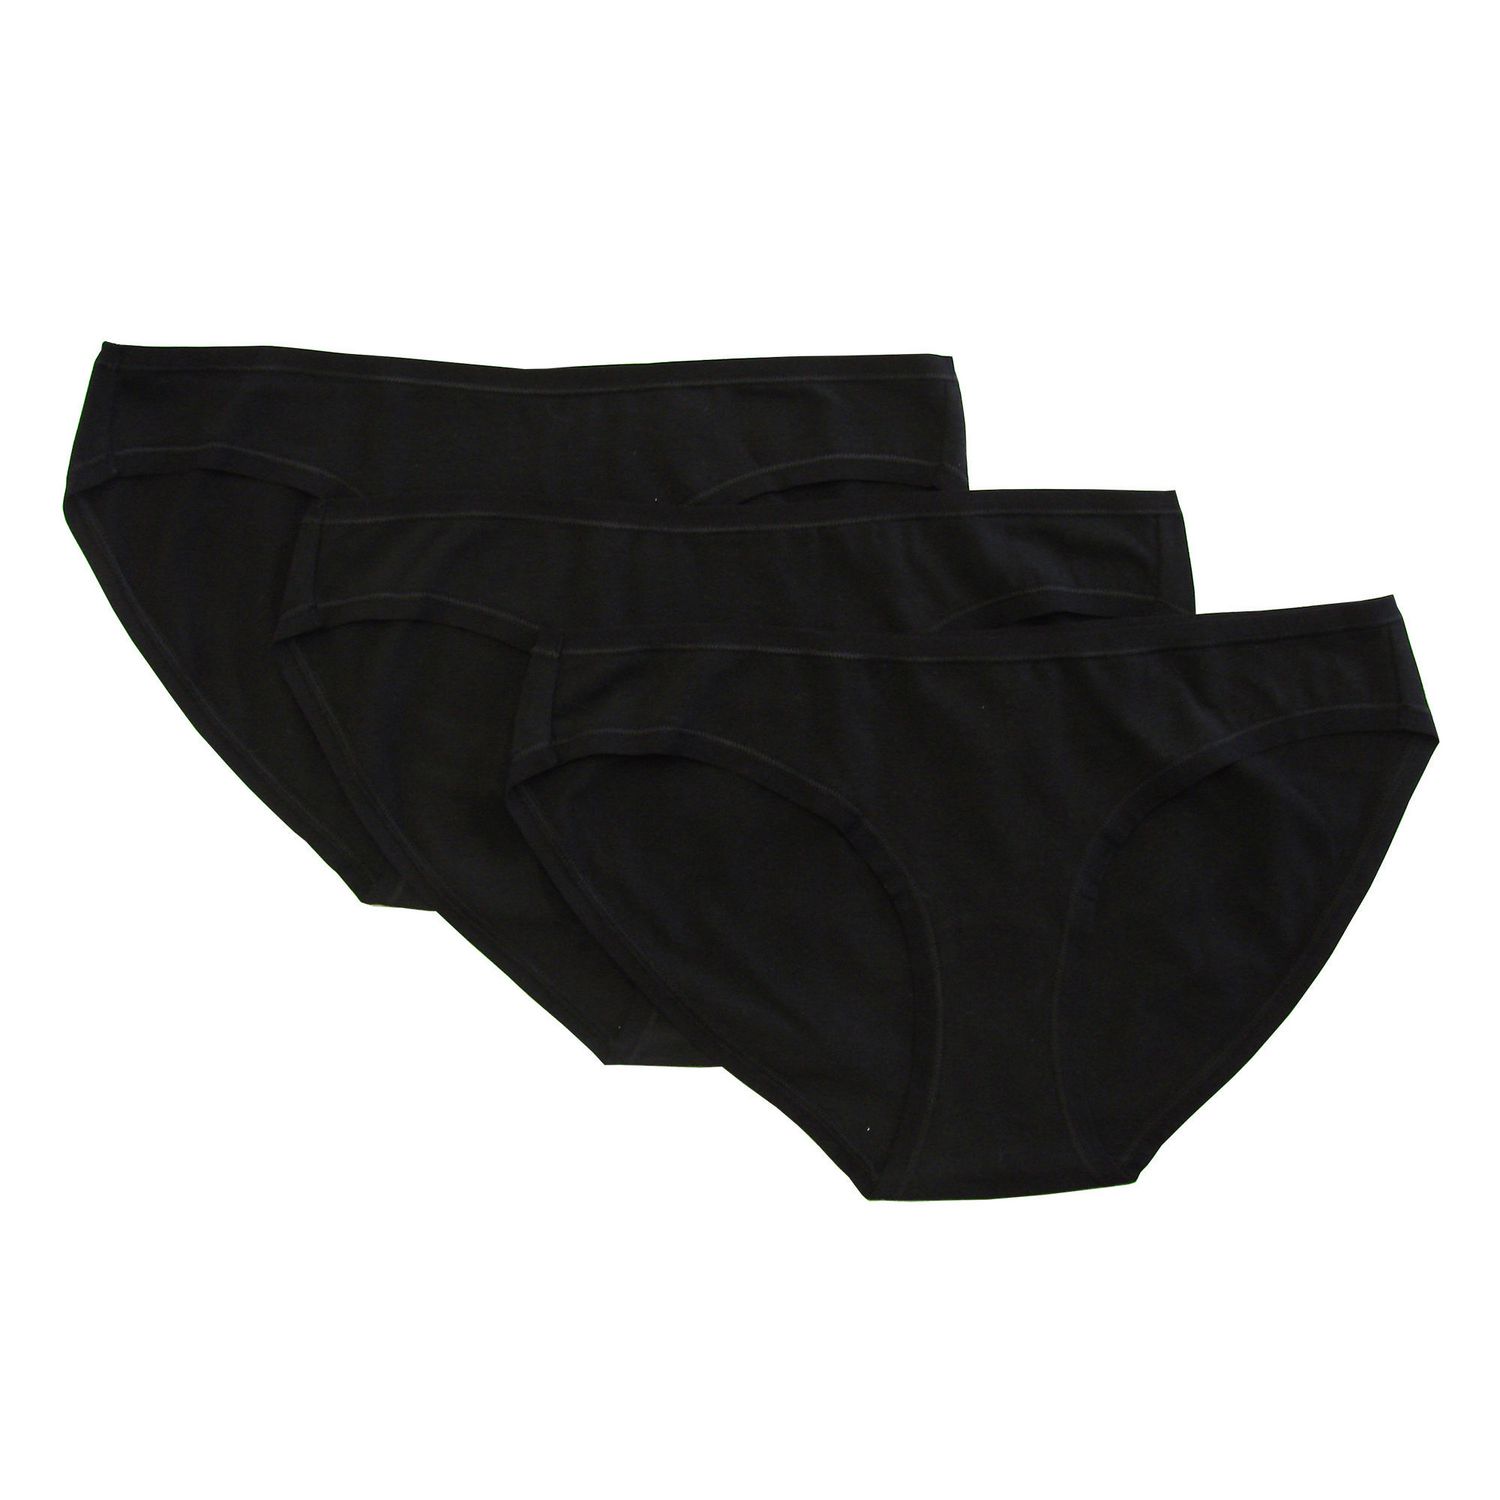 Pack of 3 women's briefs in stretch cotton with savannah patterns in Black  Les Pockets